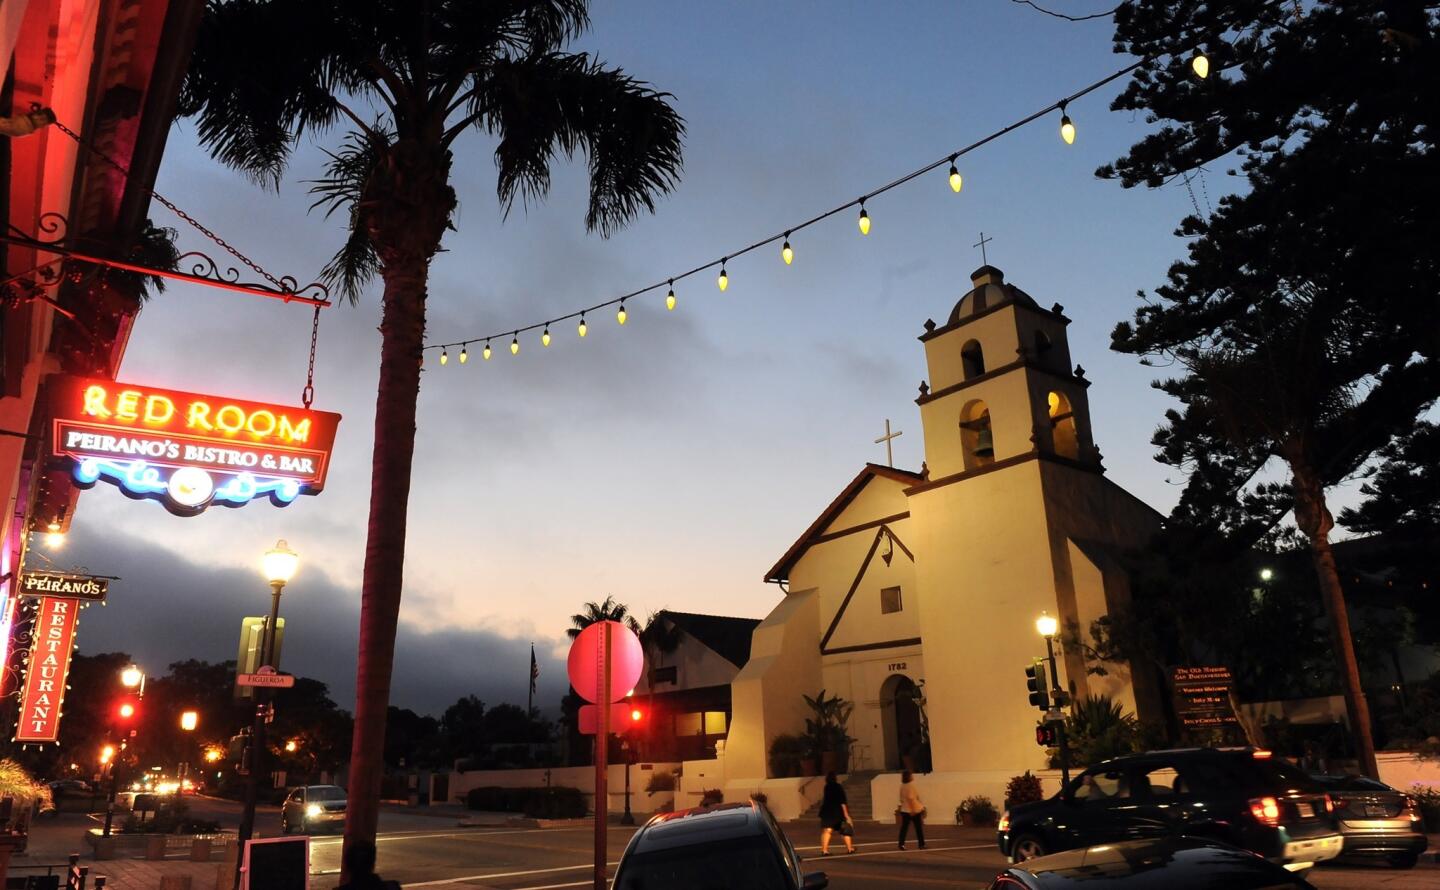 At night, downtown Ventura lights up the mission.